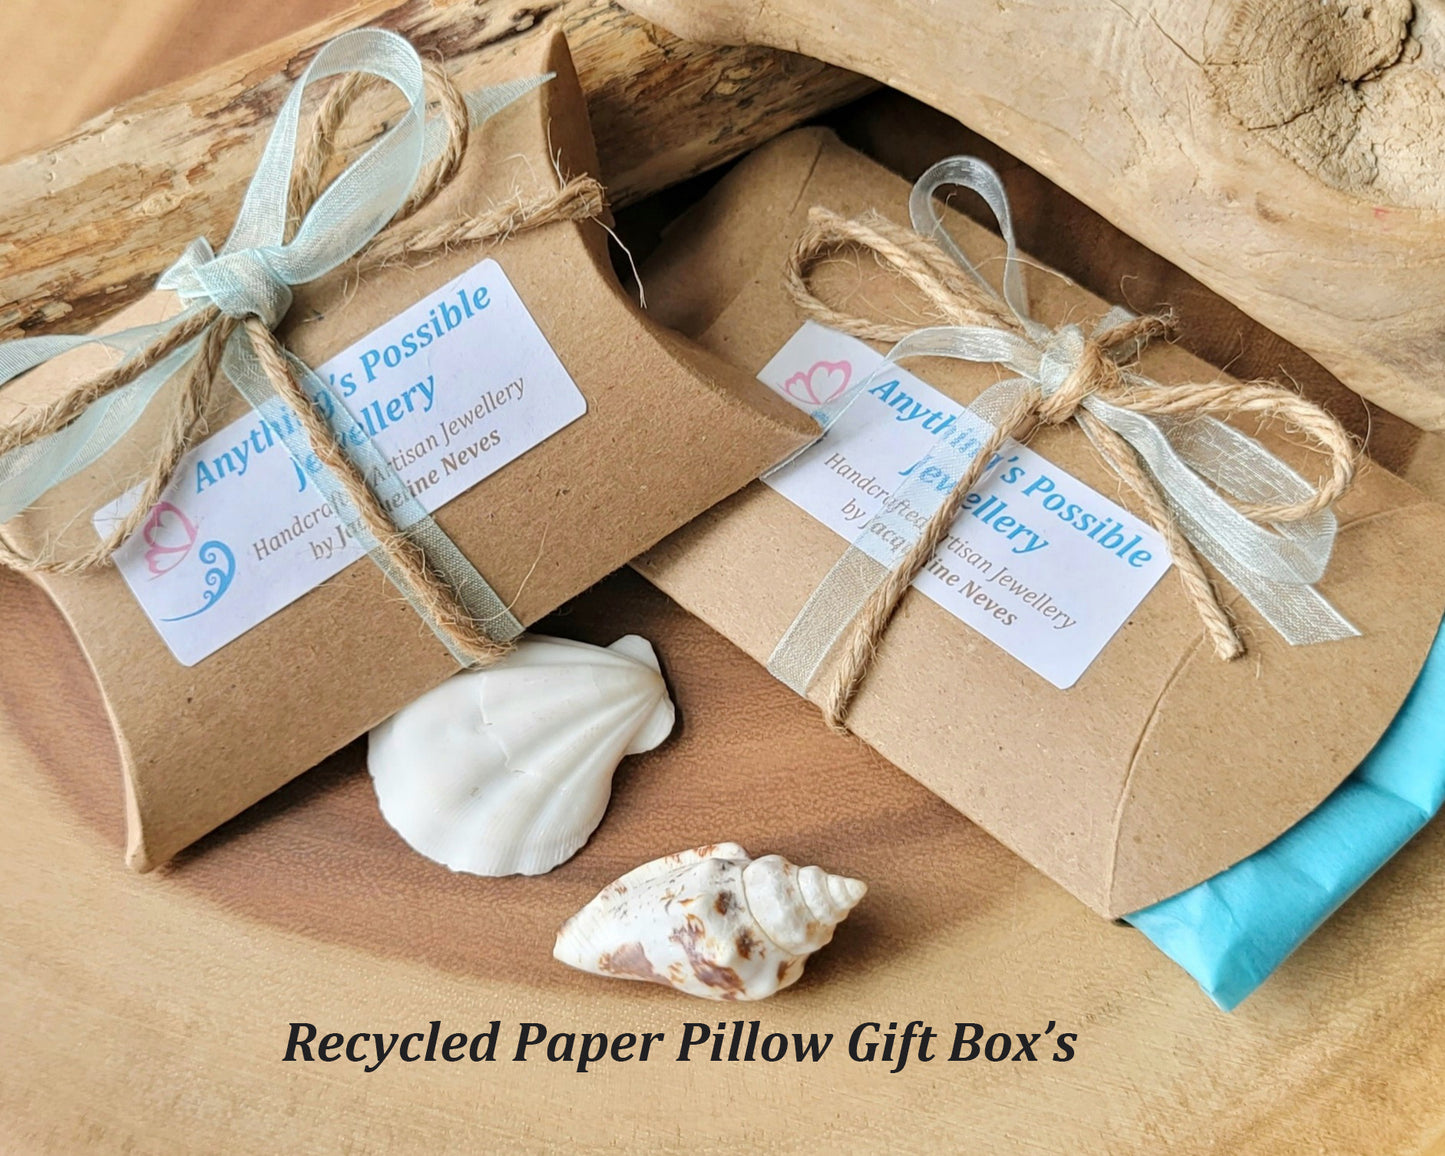 Eco Friendlier Recycled Paper Pillow Gift Box with Tissue, Ribbon and Twine